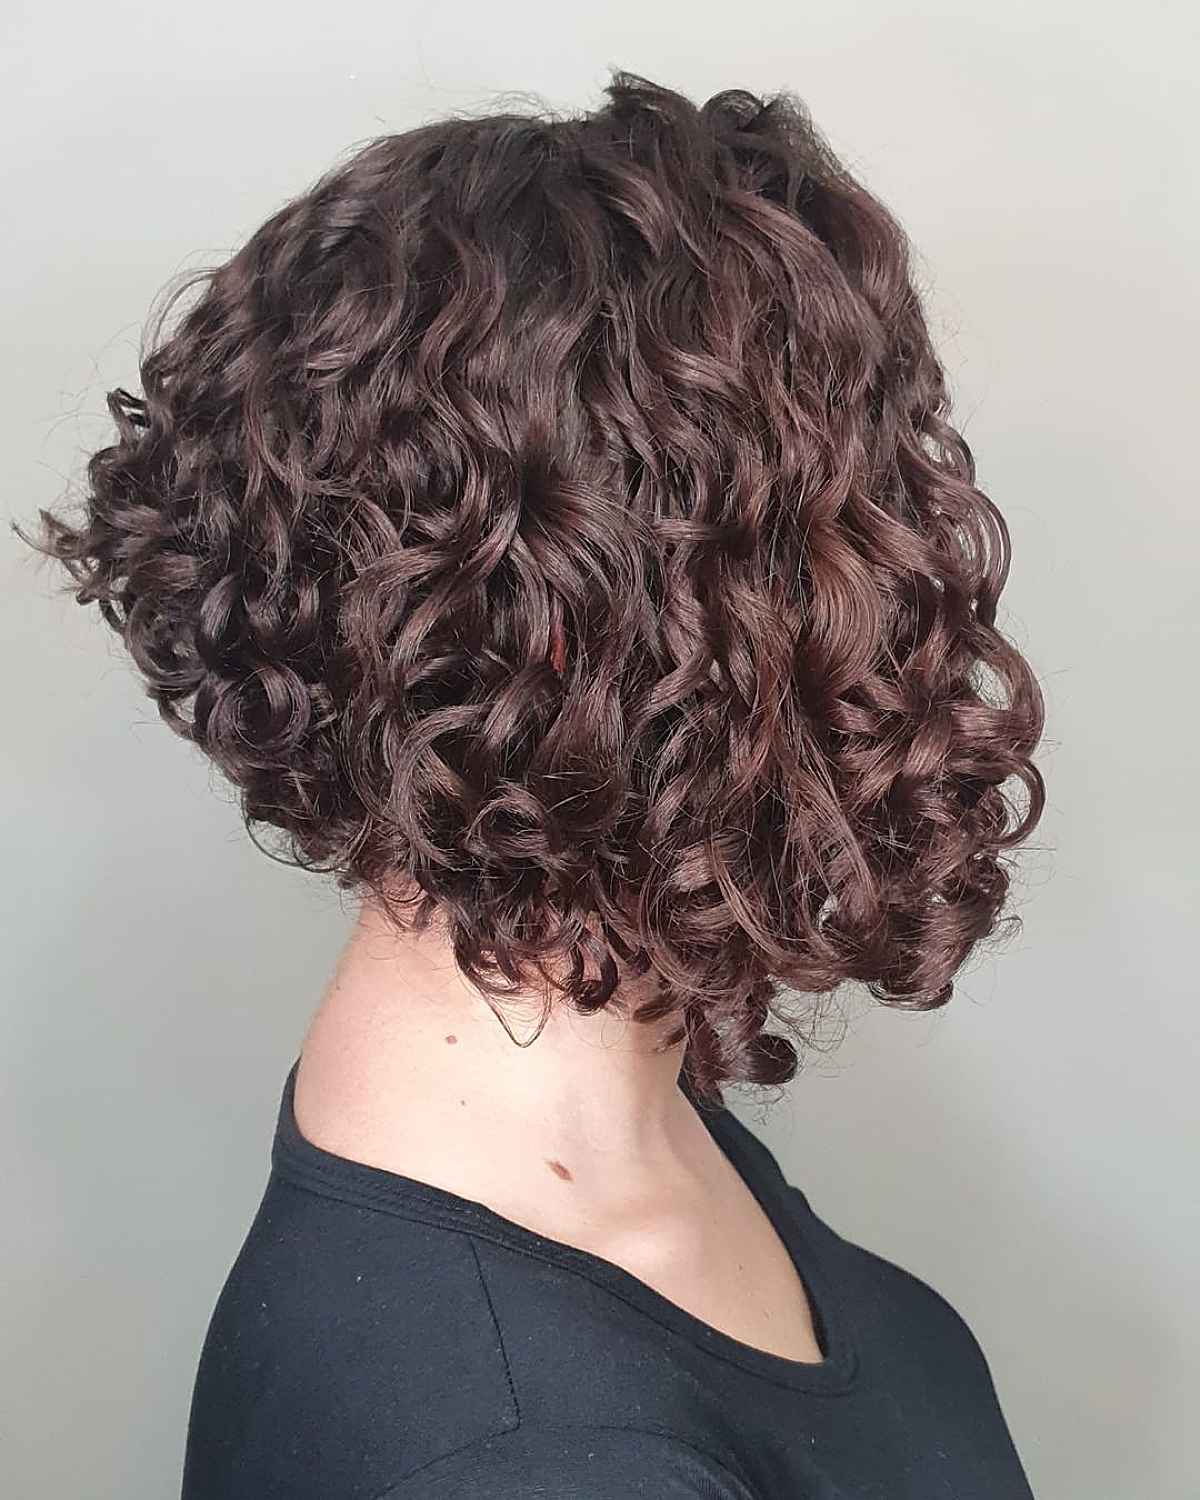 Shorter Stacked Bob with Loose Curls